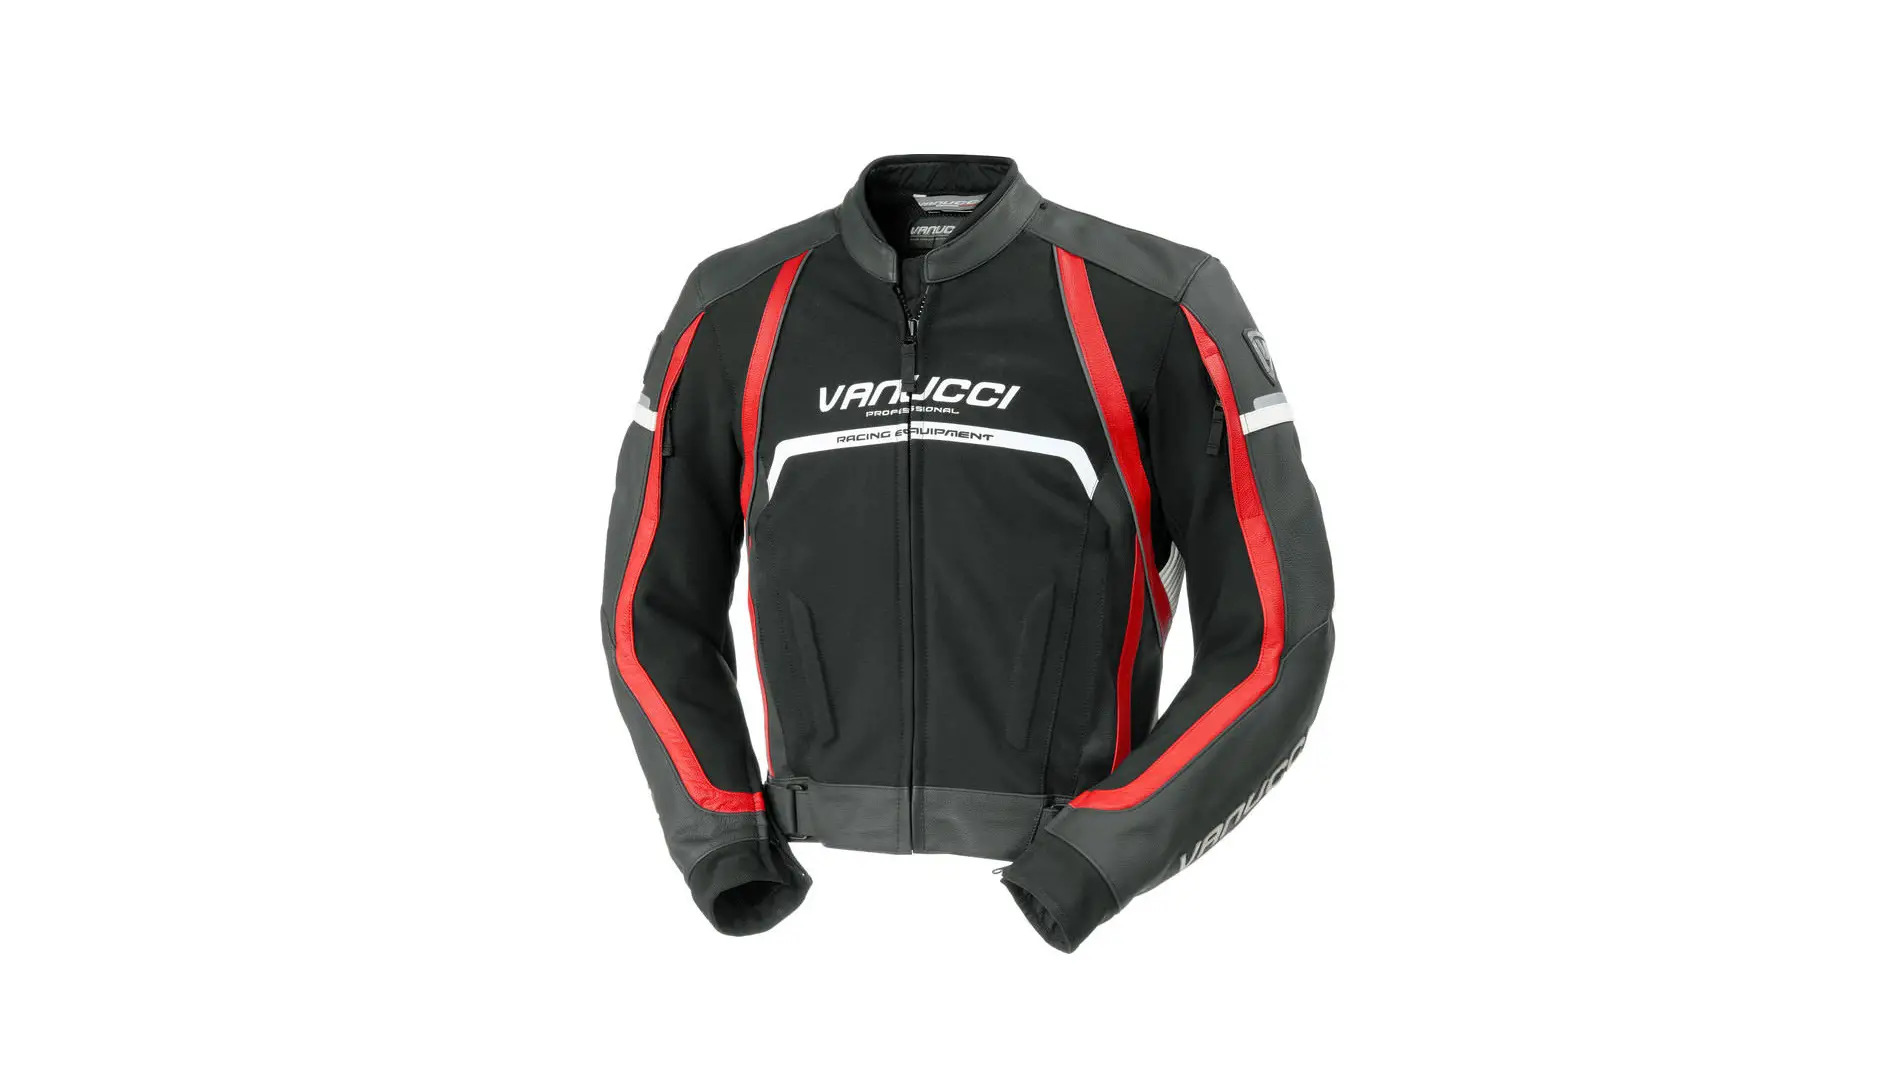 Vanucci Motorcycle Jackets and Pants for Non-Professional Motorcycle Riders